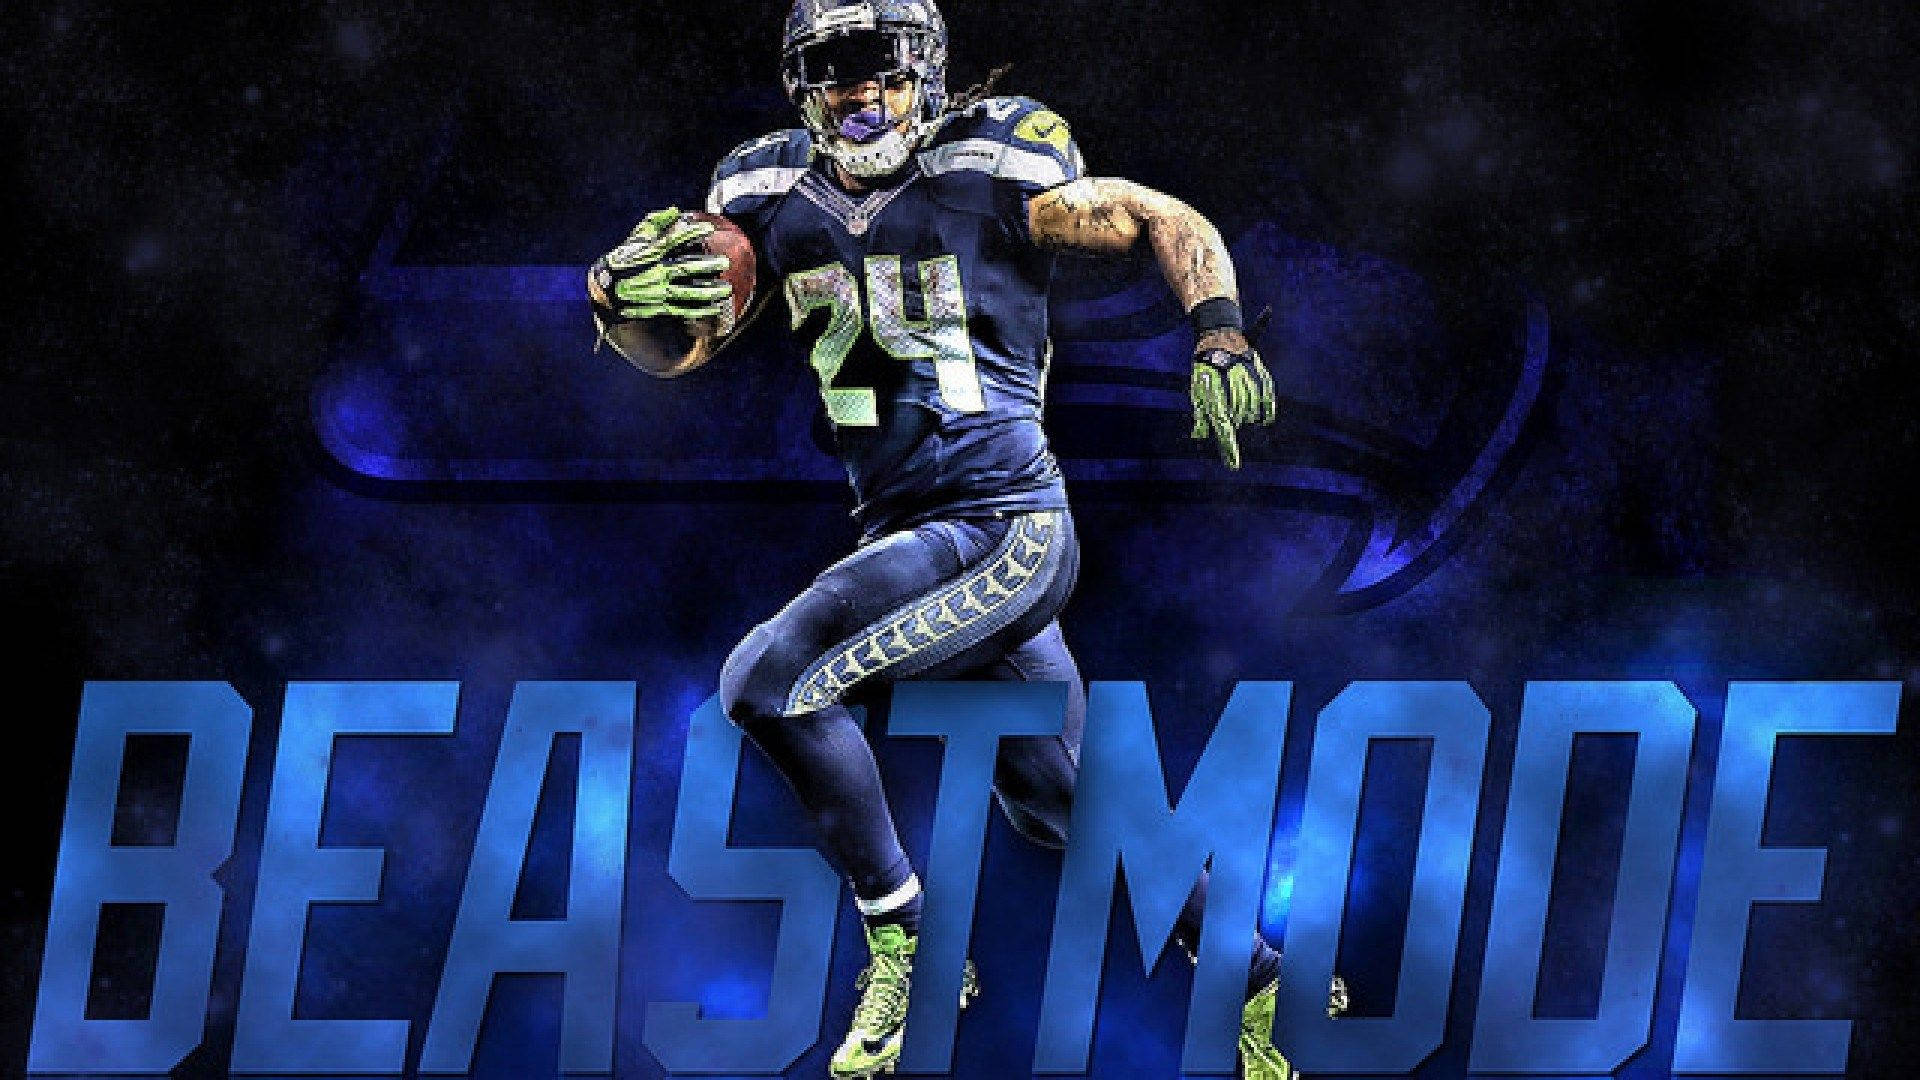 Cool Seahawks Wallpapers